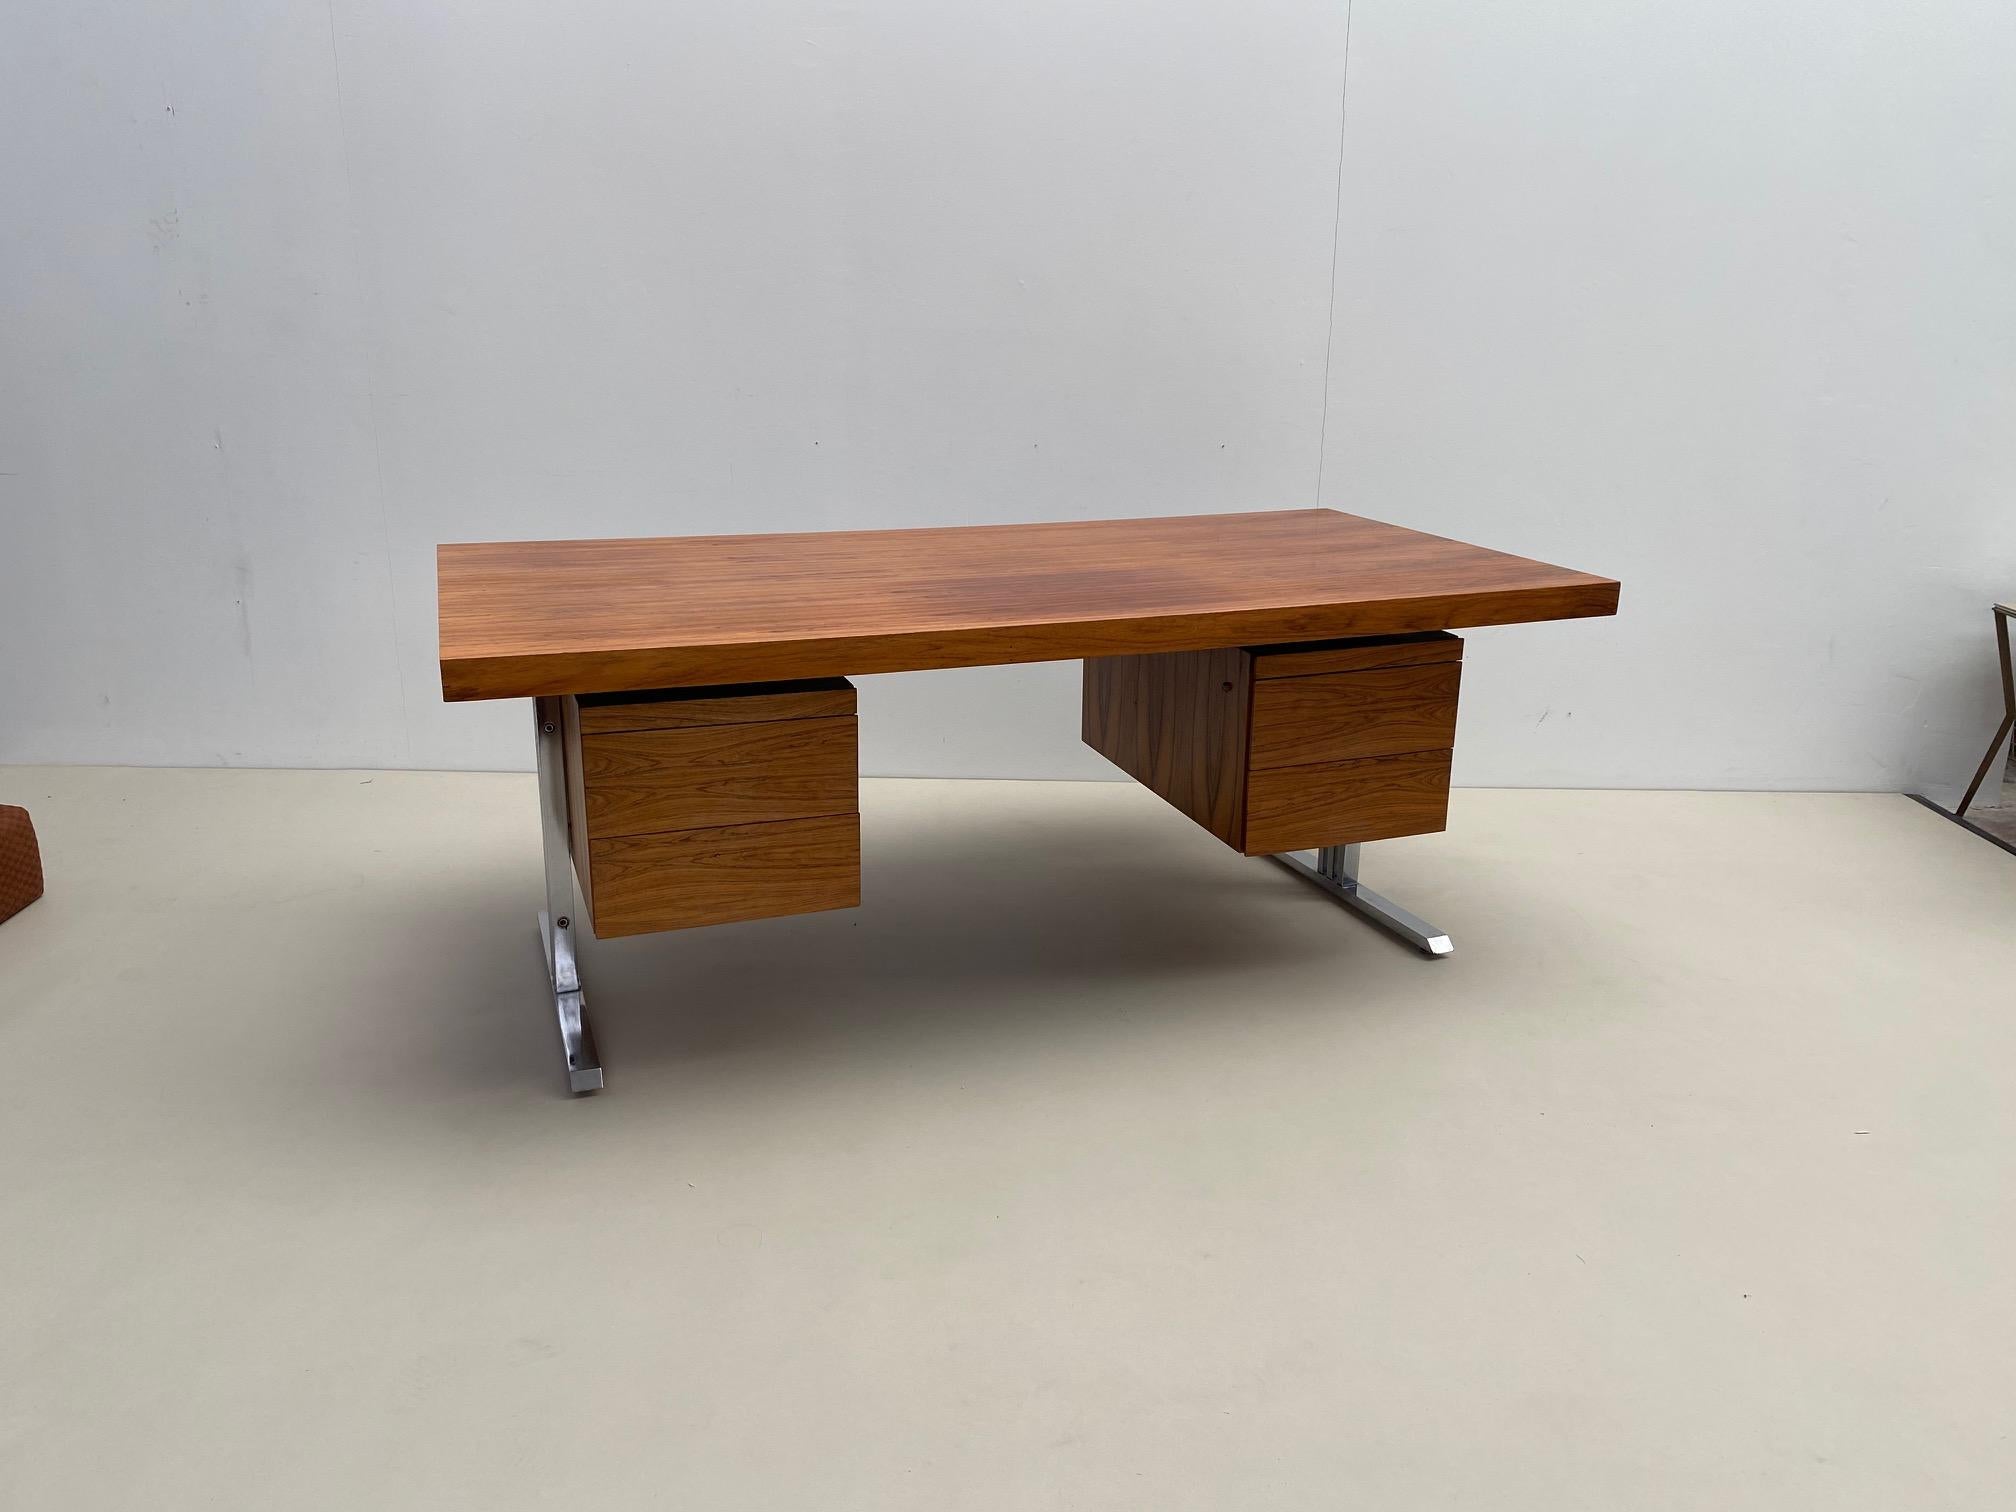 Mid-Century Modern Italian Desk with Drawers , Wood and Chrome, 1970s For Sale 6